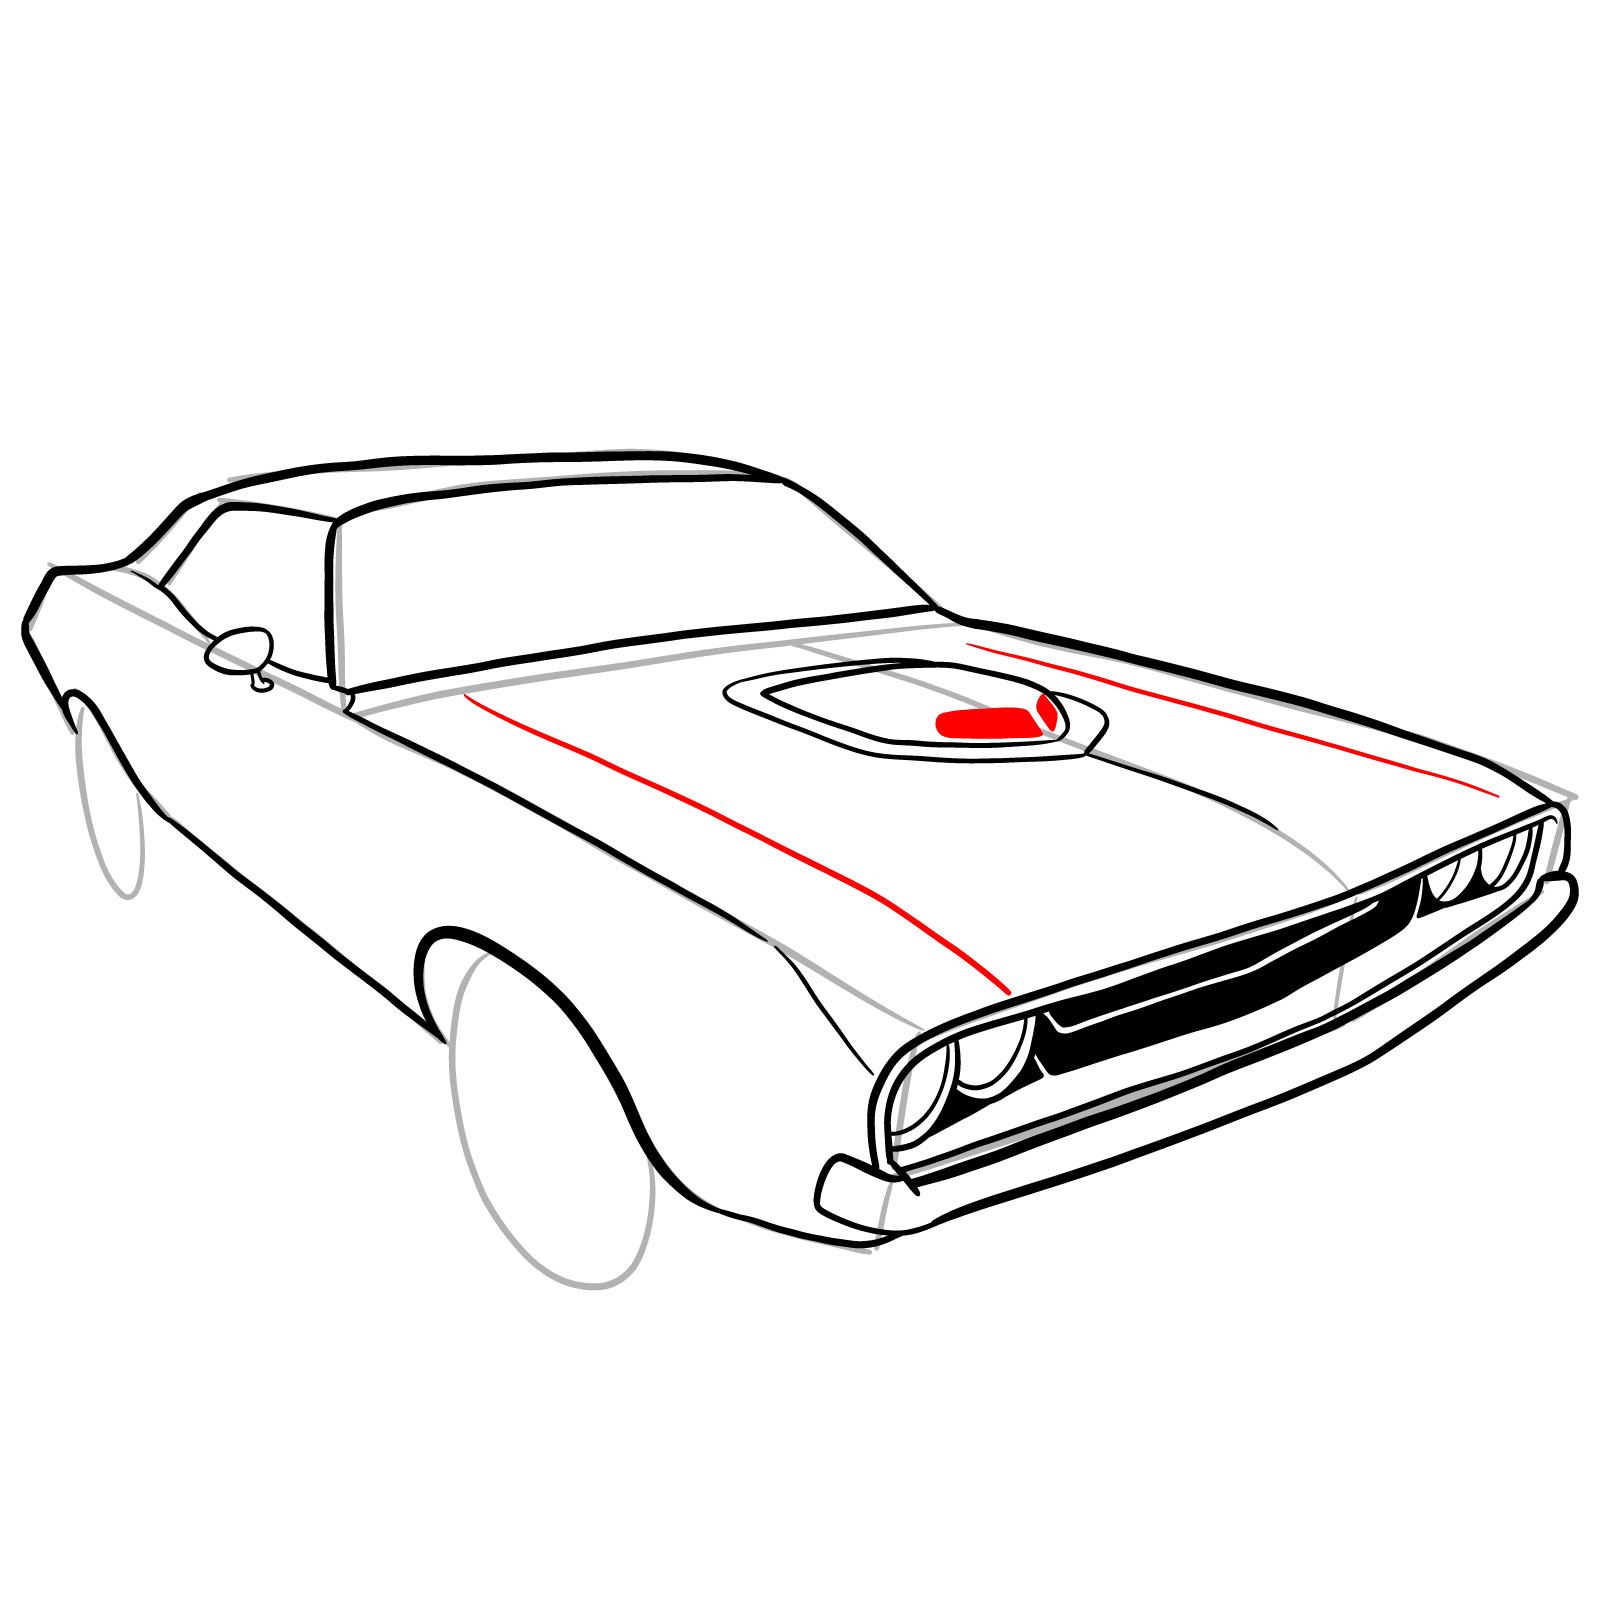 How to draw Dodge Challenger 1970 - step 25